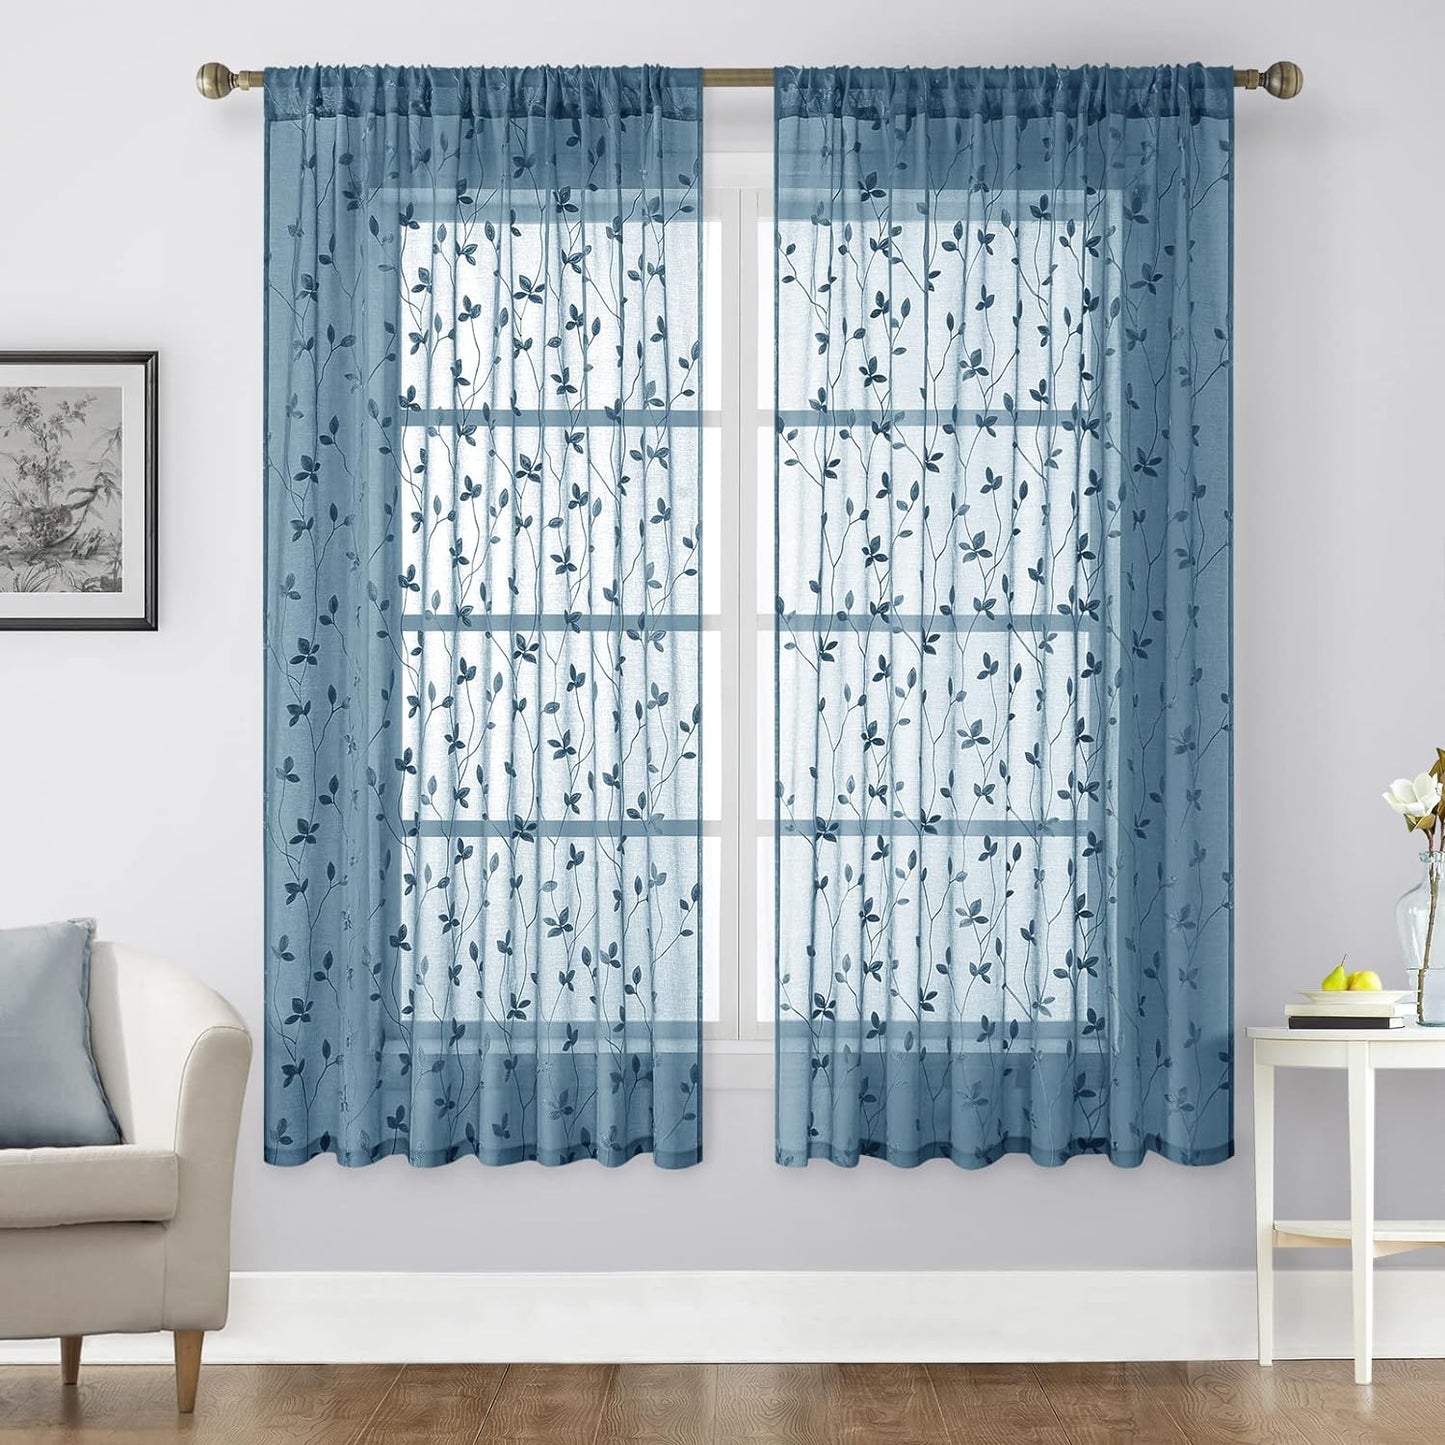 HOMEIDEAS Sage Green Sheer Curtains 52 X 63 Inches Length 2 Panels Embroidered Leaf Pattern Pocket Faux Linen Floral Semi Sheer Voile Window Curtains/Drapes for Bedroom Living Room  HOMEIDEAS Cyan Blue W52" X L63" 